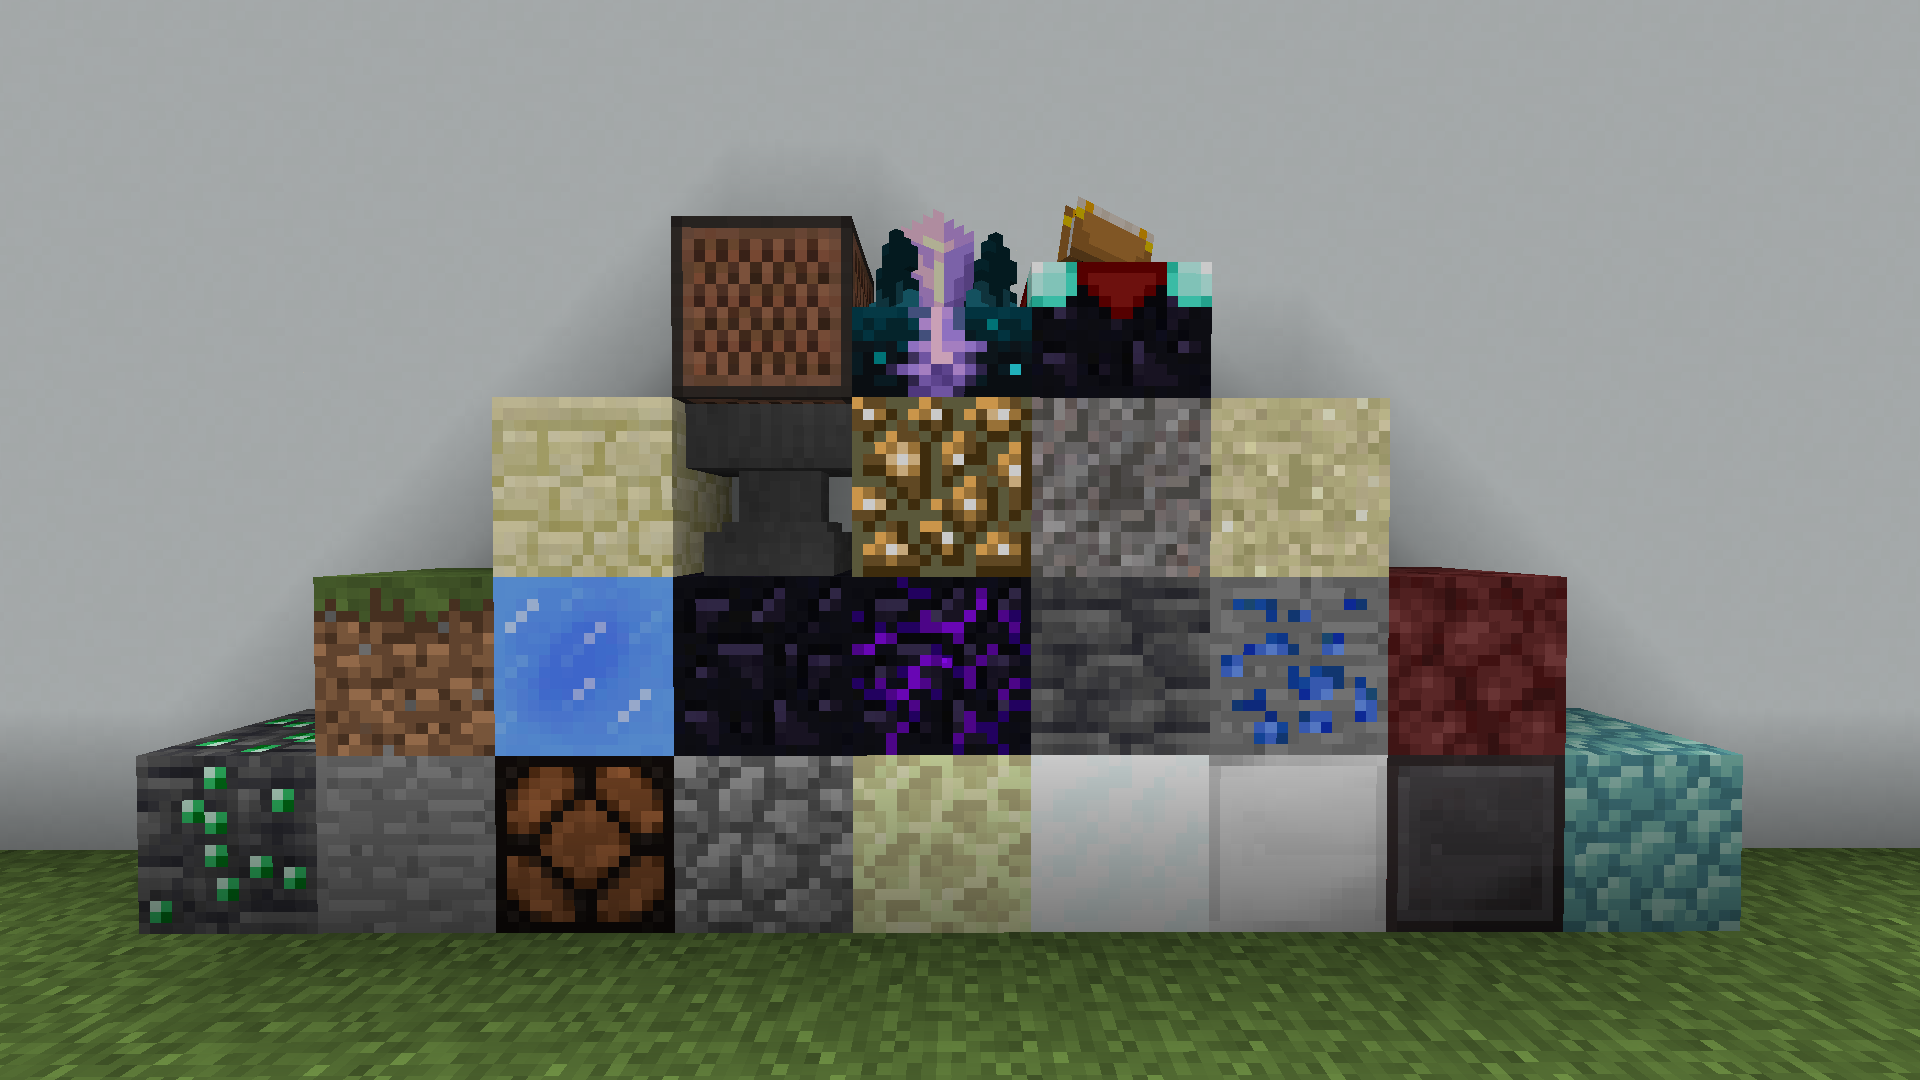 Some textures from the resource pack. Vanilla with some mixed textures.